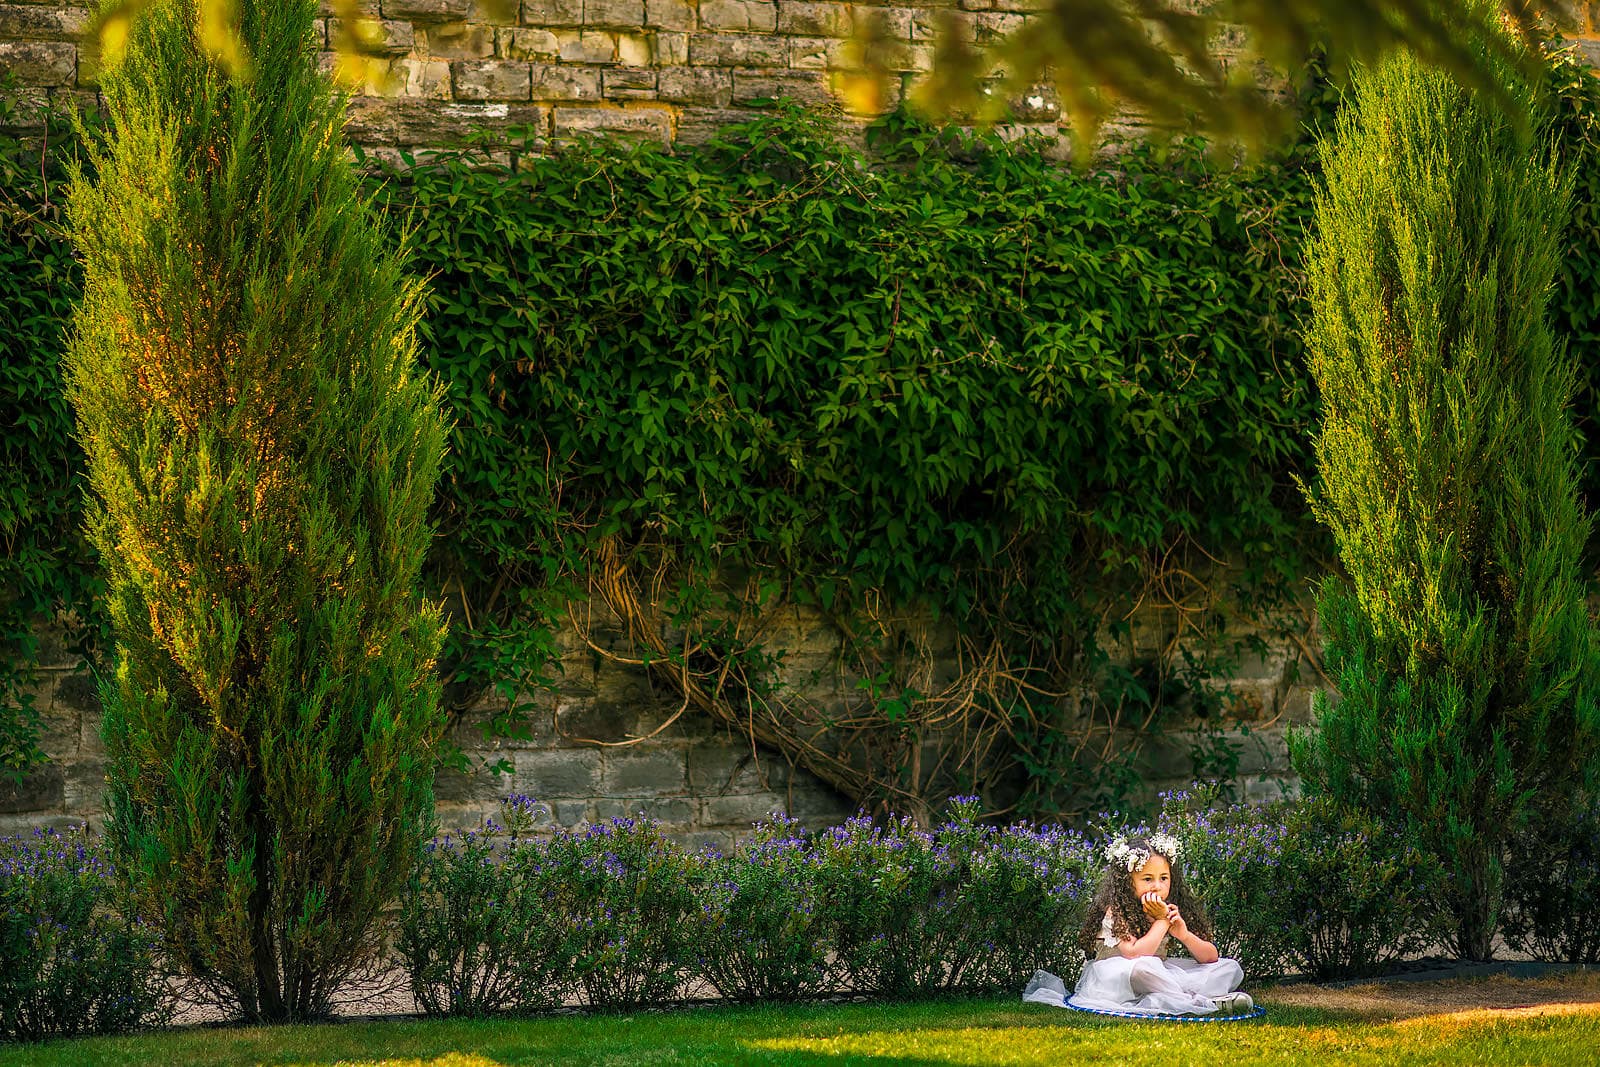 Little moments captured reportage style by Cotswolds wedding photographer Dan Morris